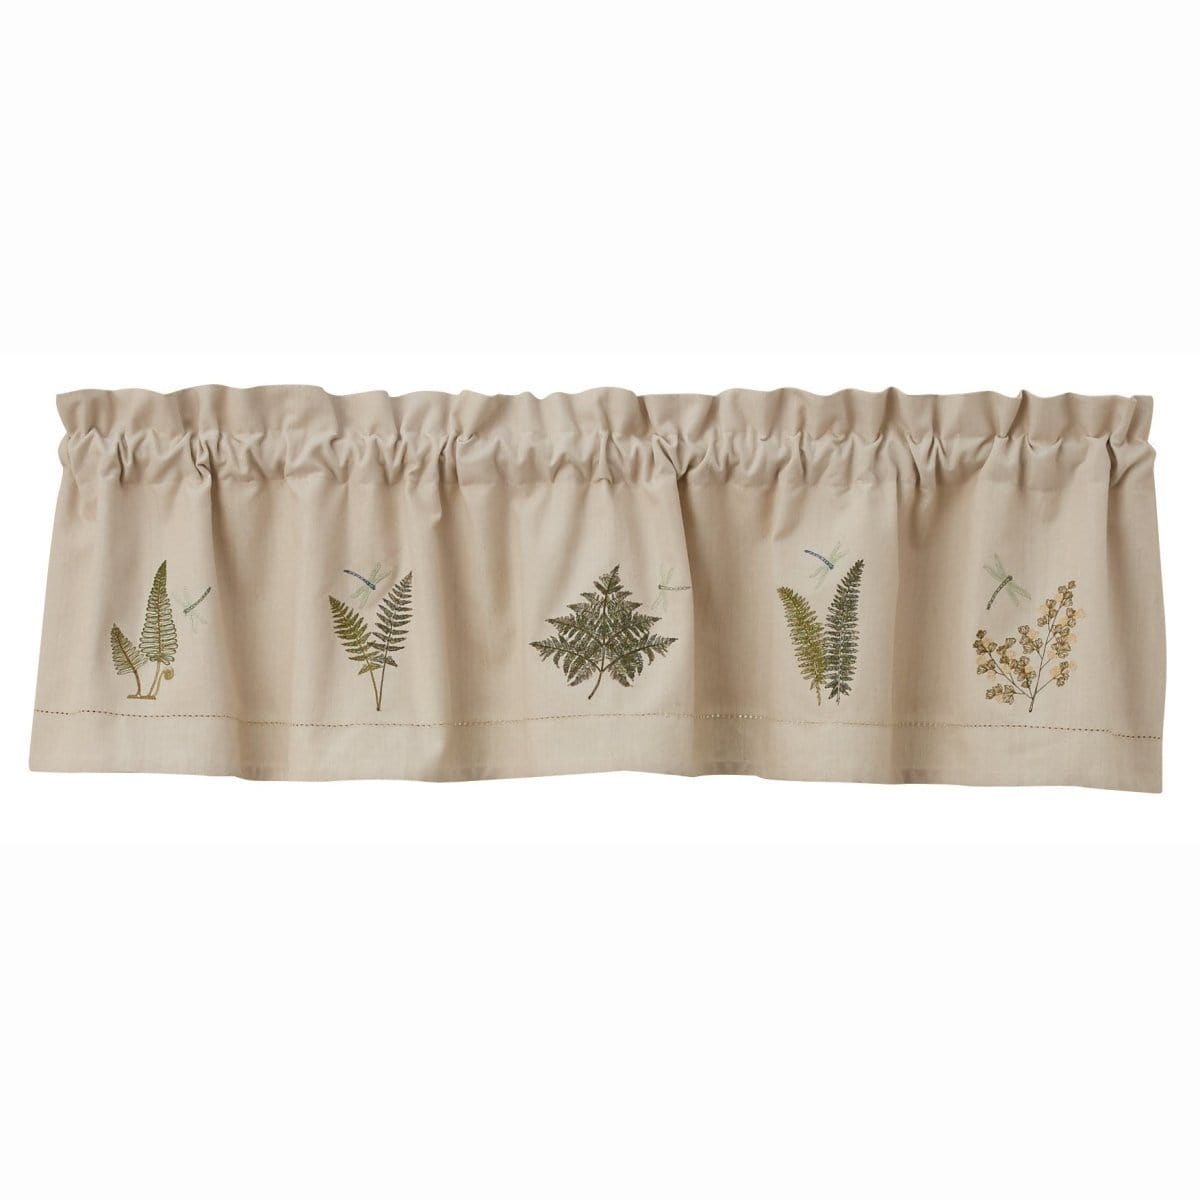 Embroidered dragonfly Valance 14" High Lined-Park Designs-The Village Merchant